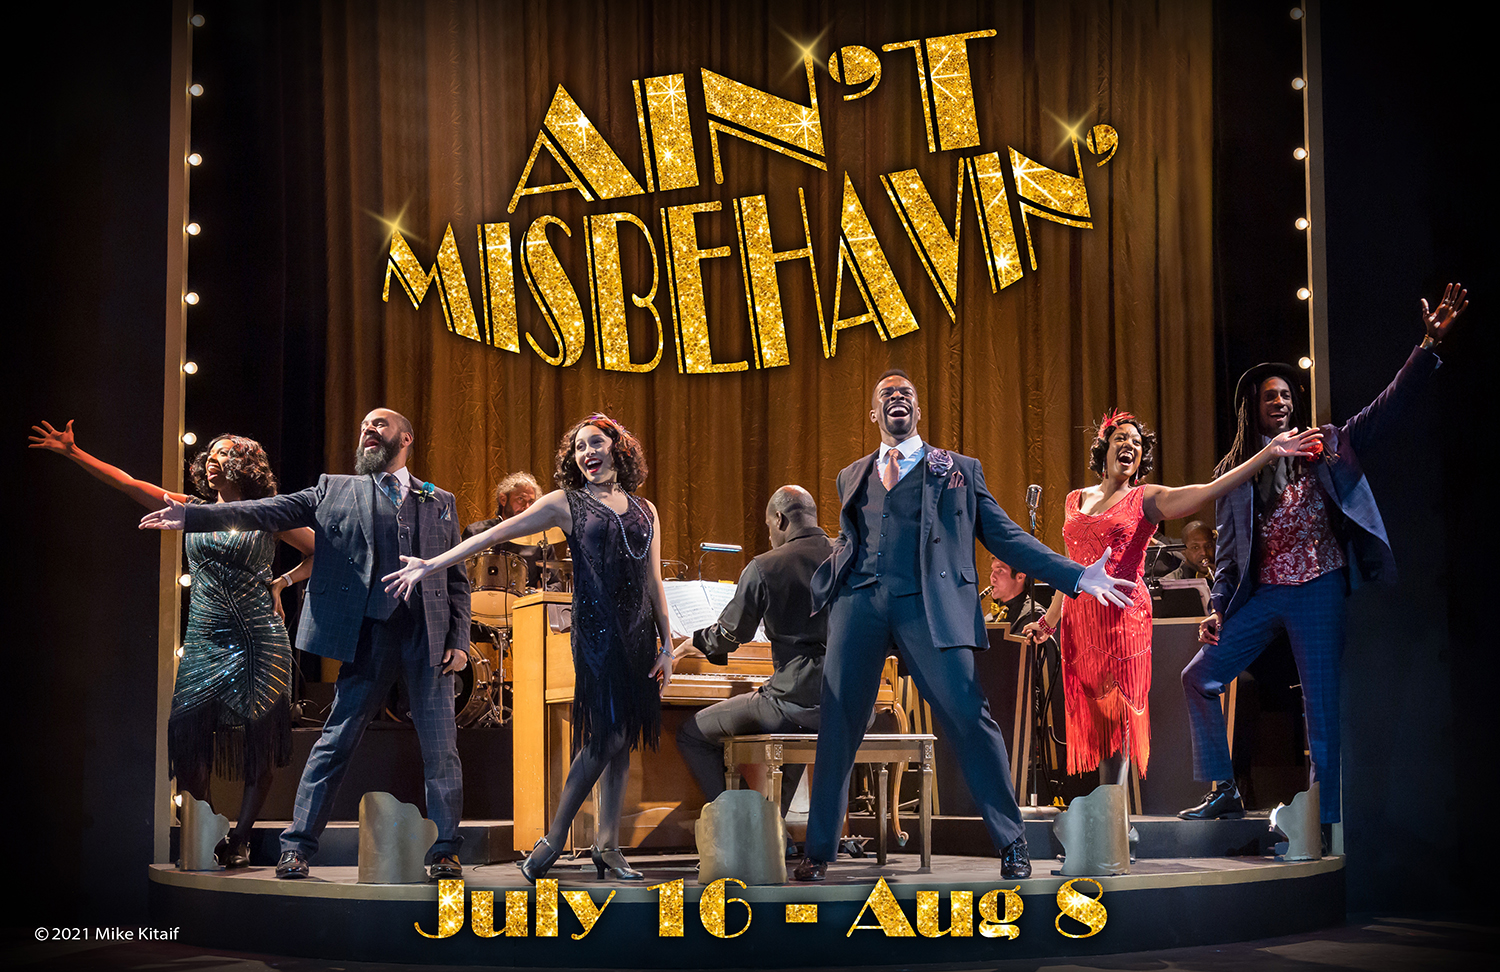 Aint Misbehavin_17x11 Cast Pic small and cropped - Athens Theatre